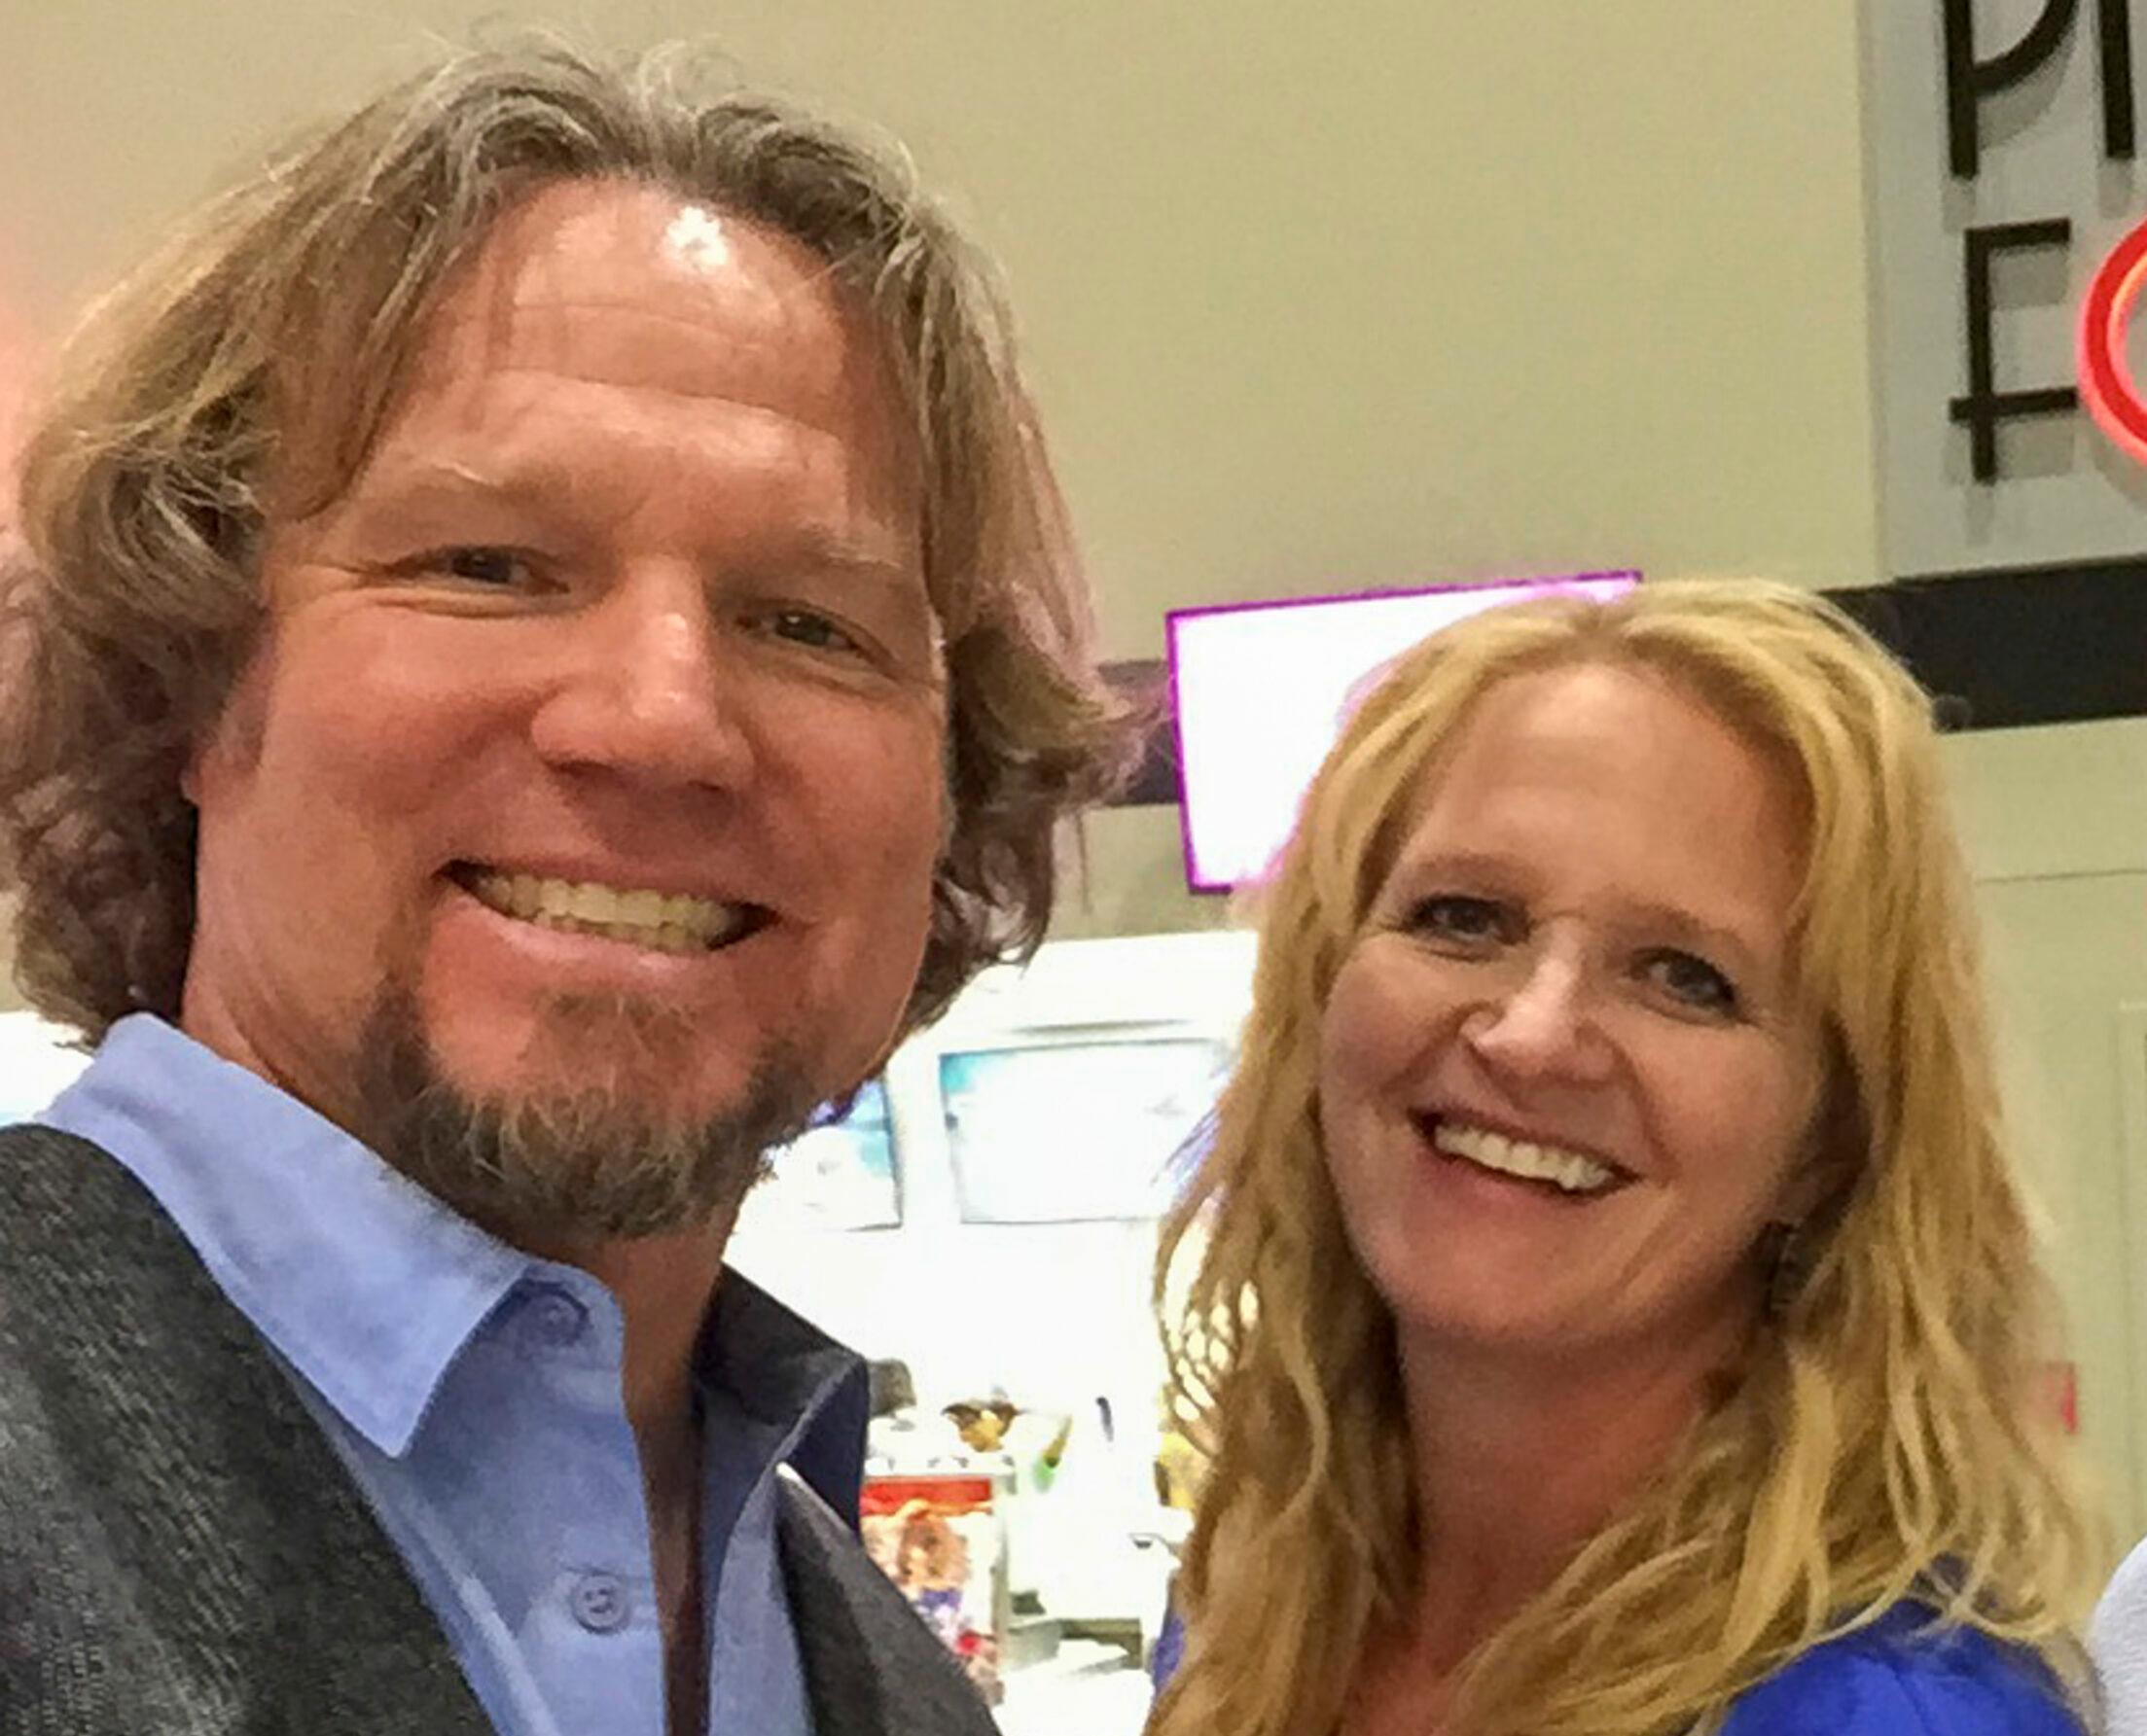 Sisterwives Kody and Christine Brown attend opening of T-Mobile arena